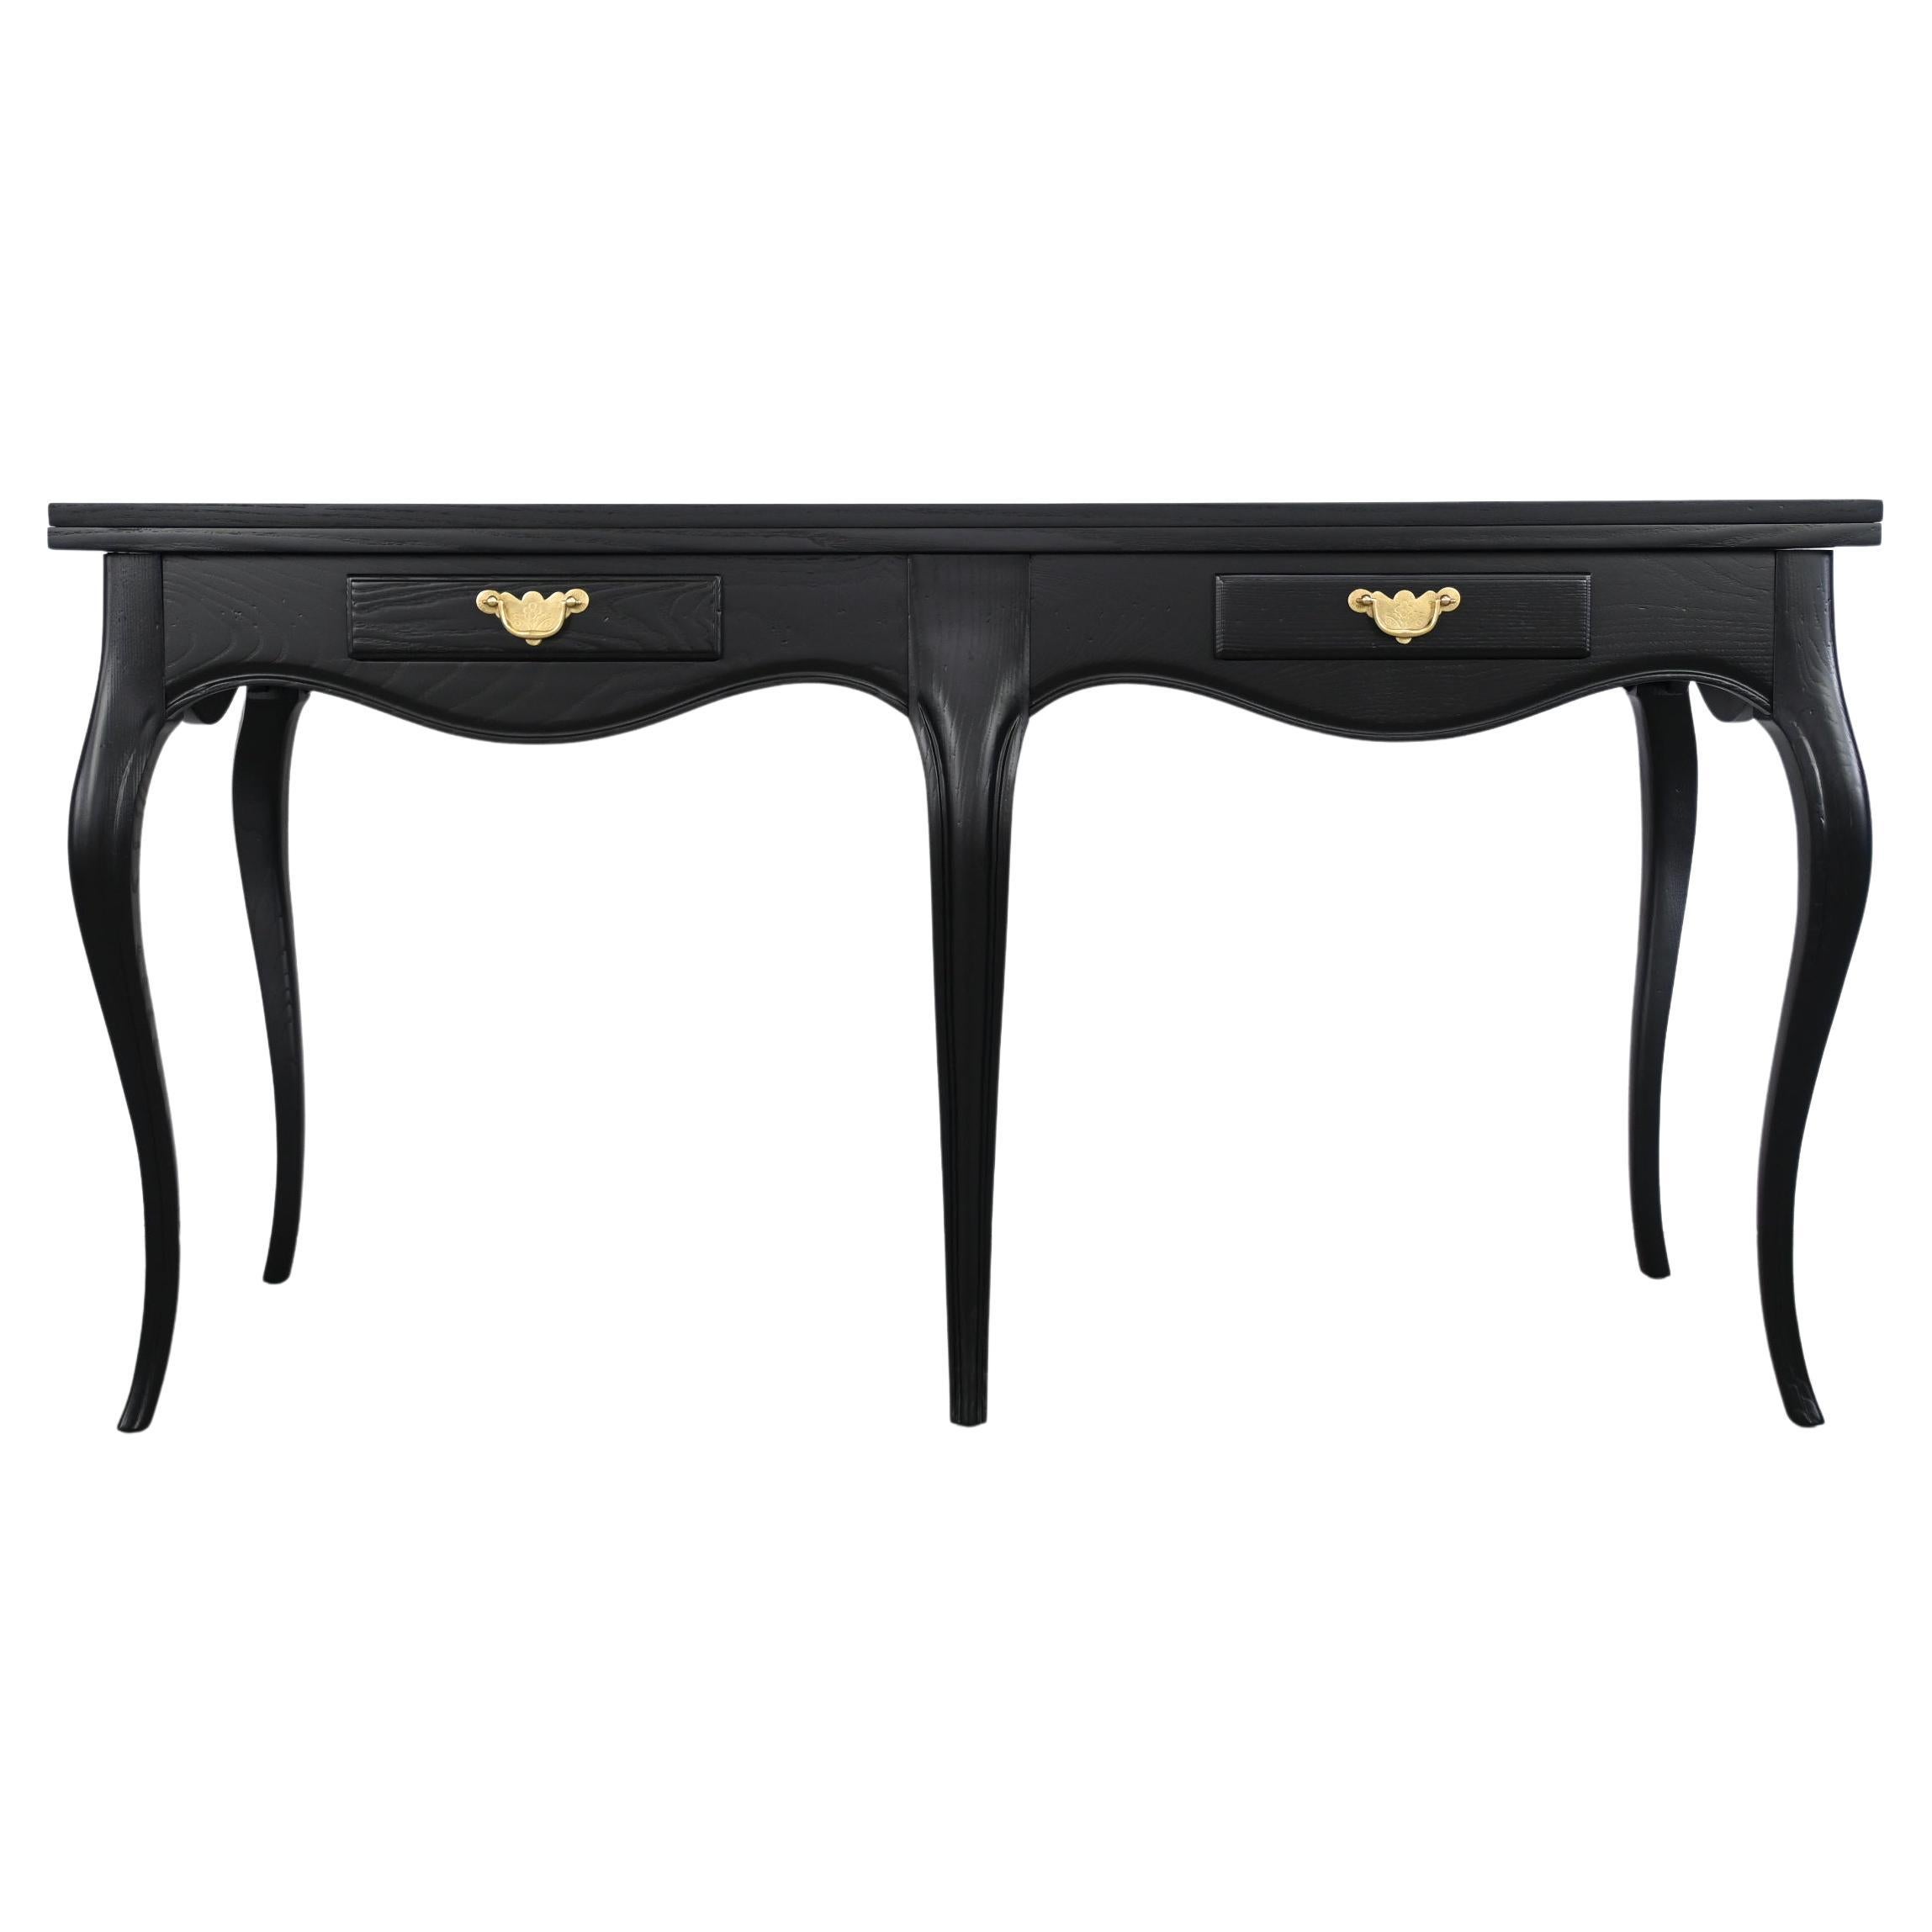 Baker Furniture Milling Road Black Lacquered French Console Table